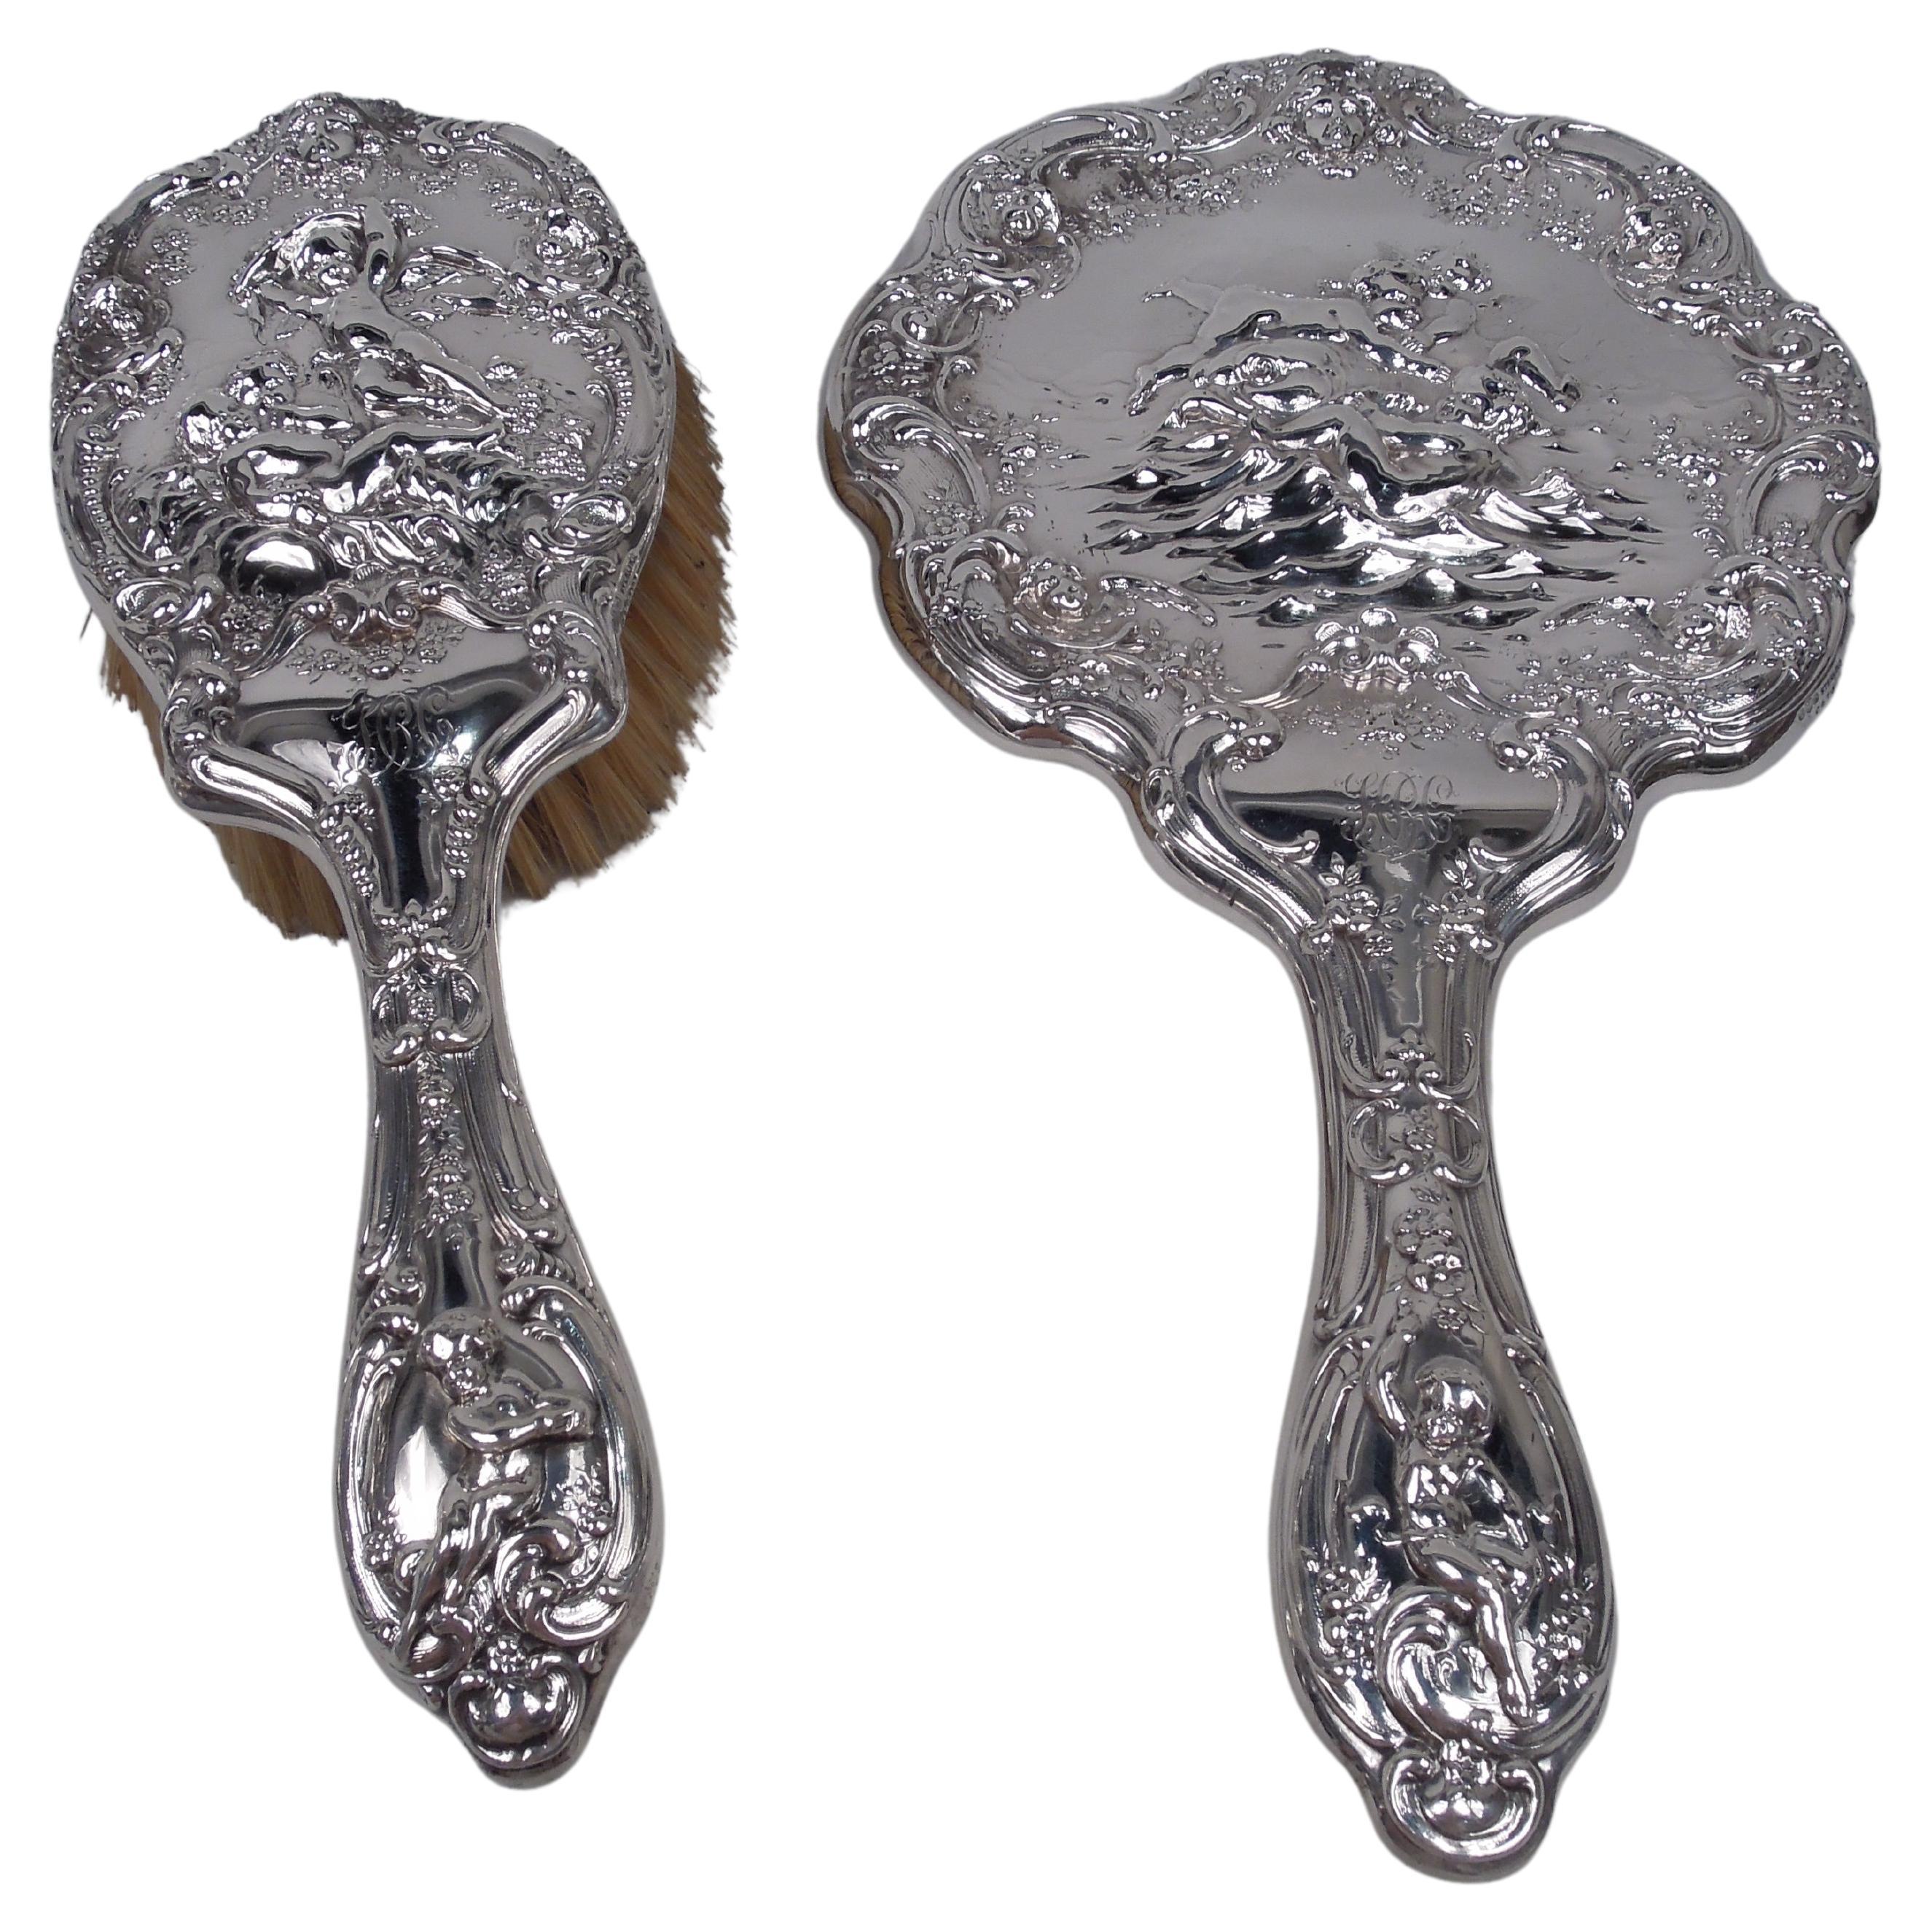 Antique Gorham Edwardian Classical Sterling Silver Mirror & Brush Pair For Sale